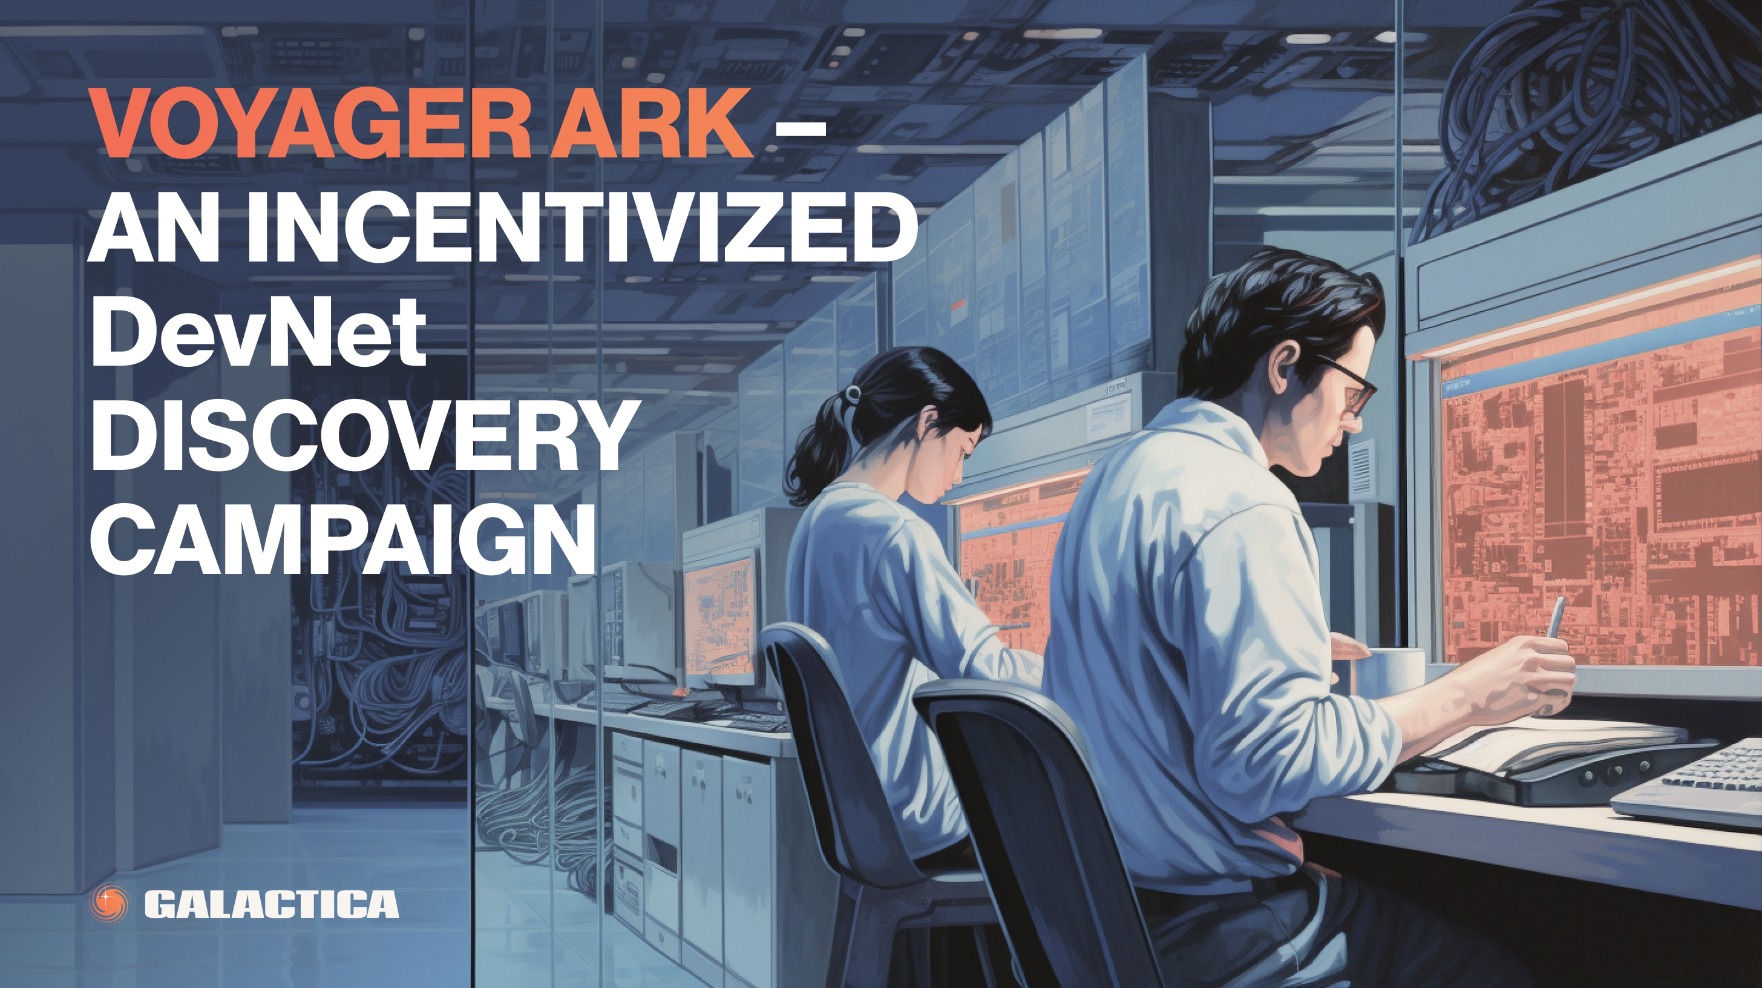 Voyager Ark: An incentivized DevNet discovery campaign